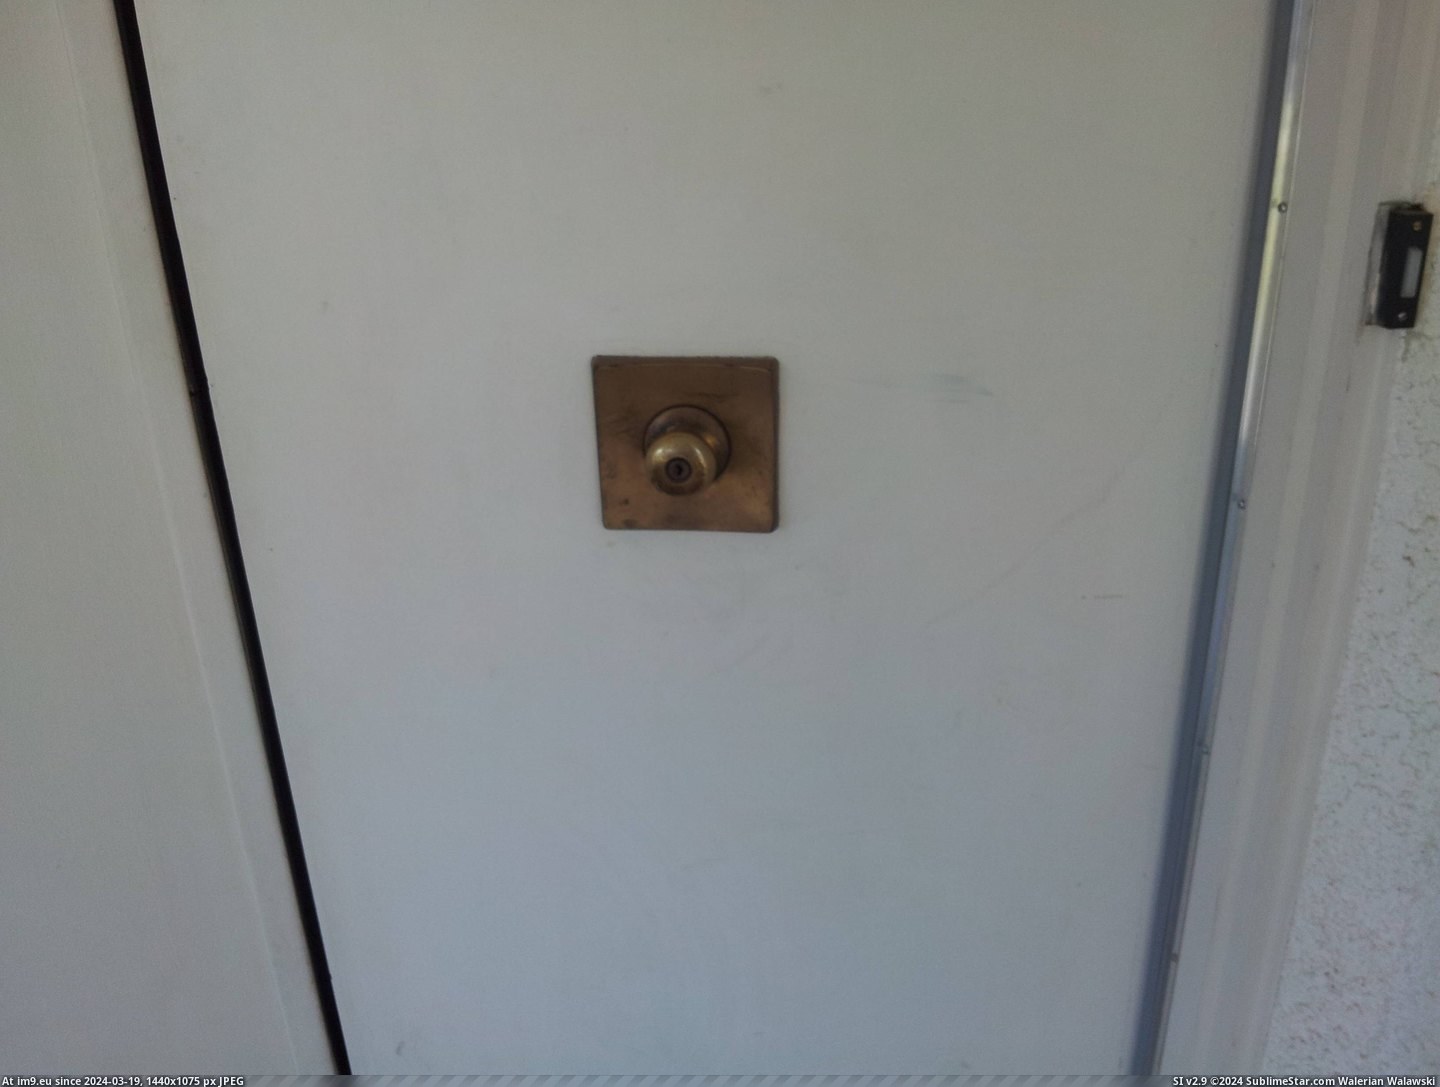 #Sister #House #Knobs #Door #Moved [Mildlyinteresting] My sister just moved into a house with door knobs in the middle of the door. 2 Pic. (Obraz z album My r/MILDLYINTERESTING favs))